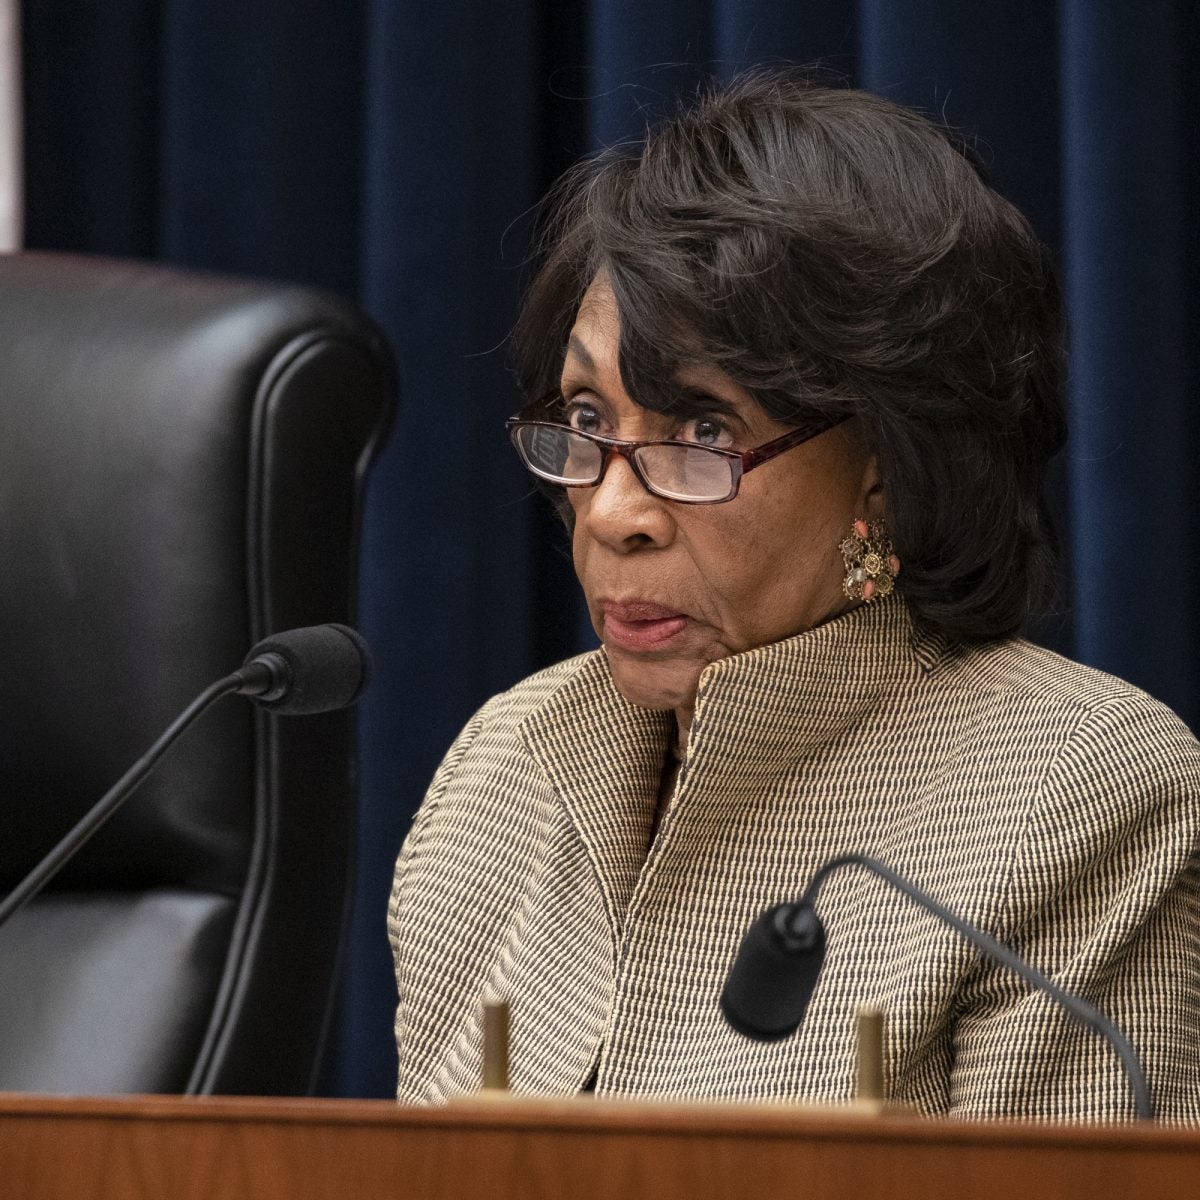 Maxine Waters Lays Into AG Barr, Calls Him 'Lap Dog' For Trump